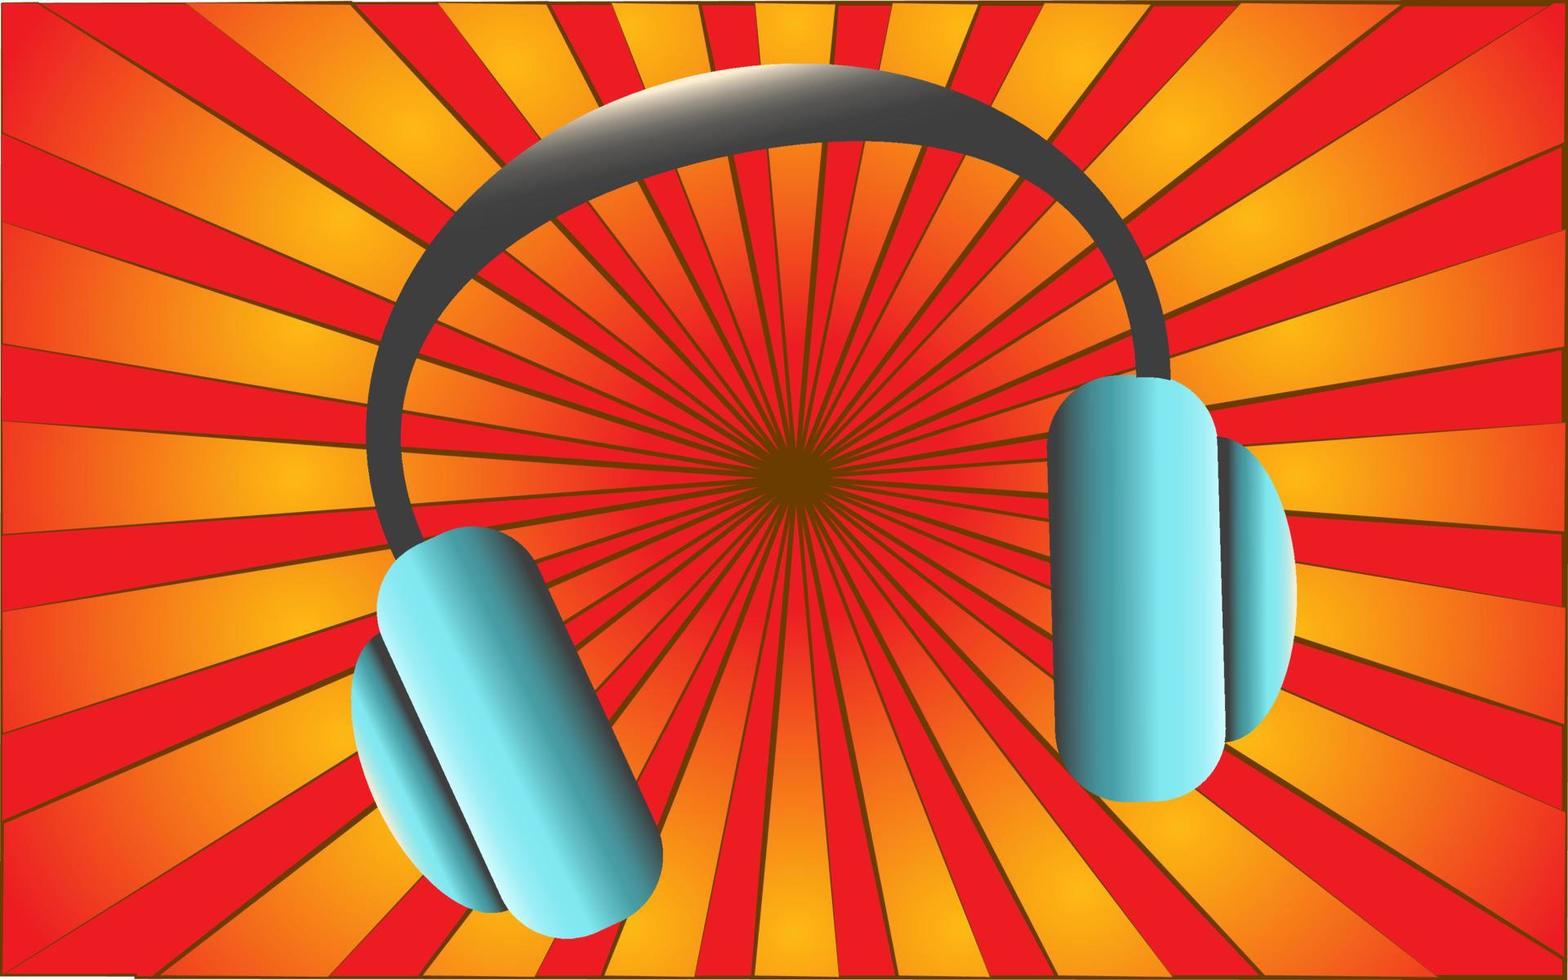 Large musical headphones on a background of abstract red rays. Vector illustration